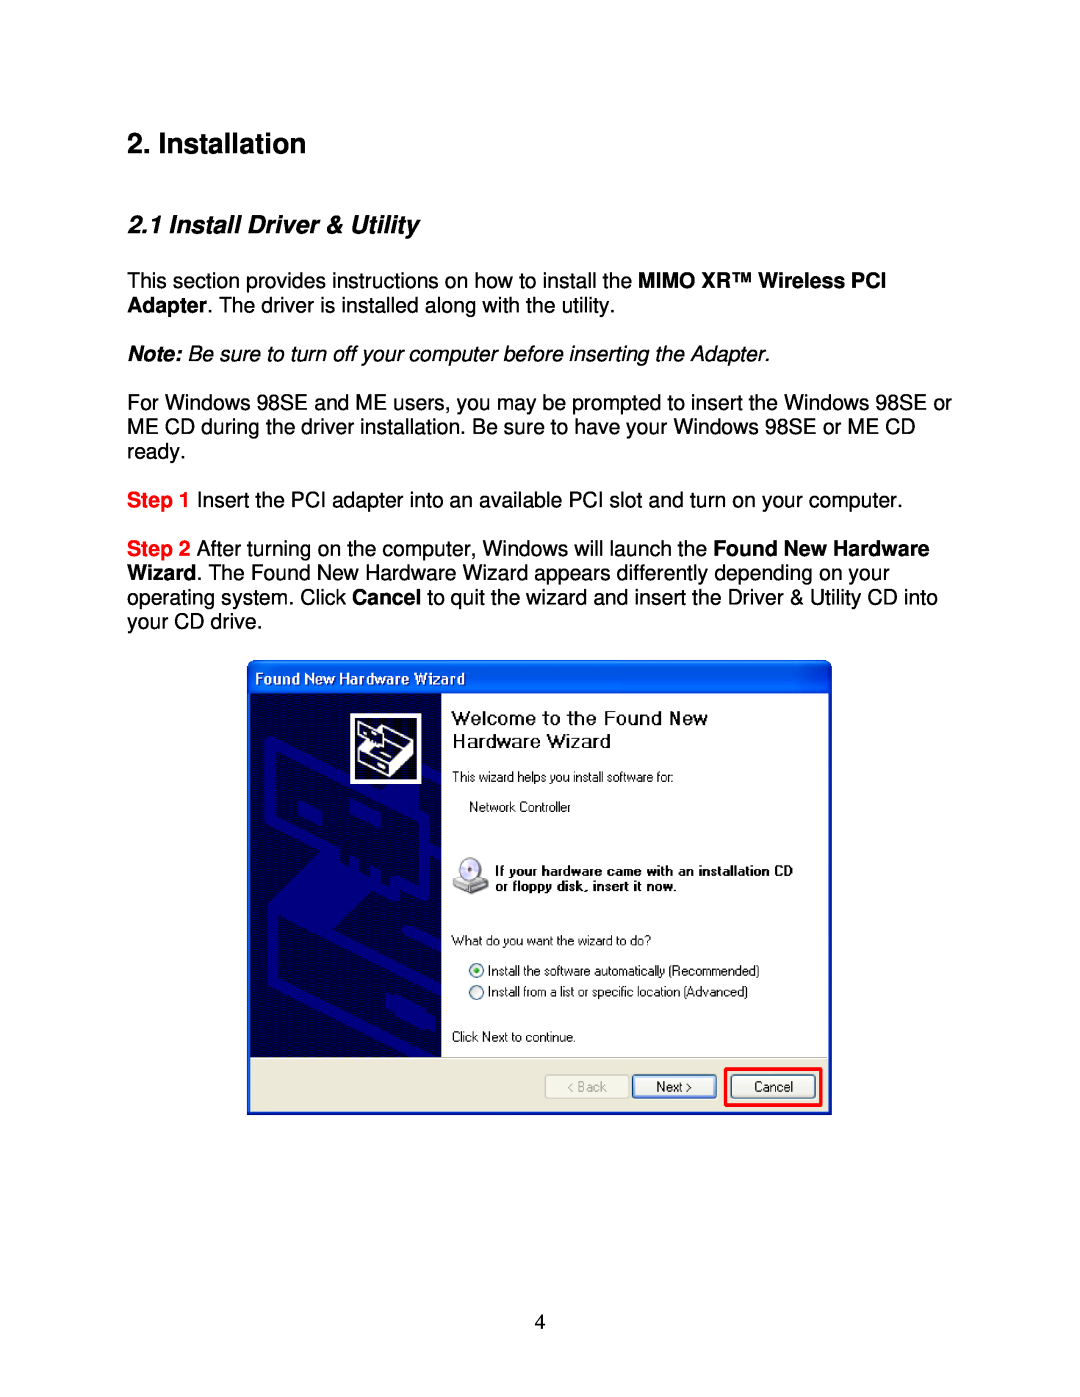 Airlink101 AWLH5026 user manual Installation, Install Driver & Utility 